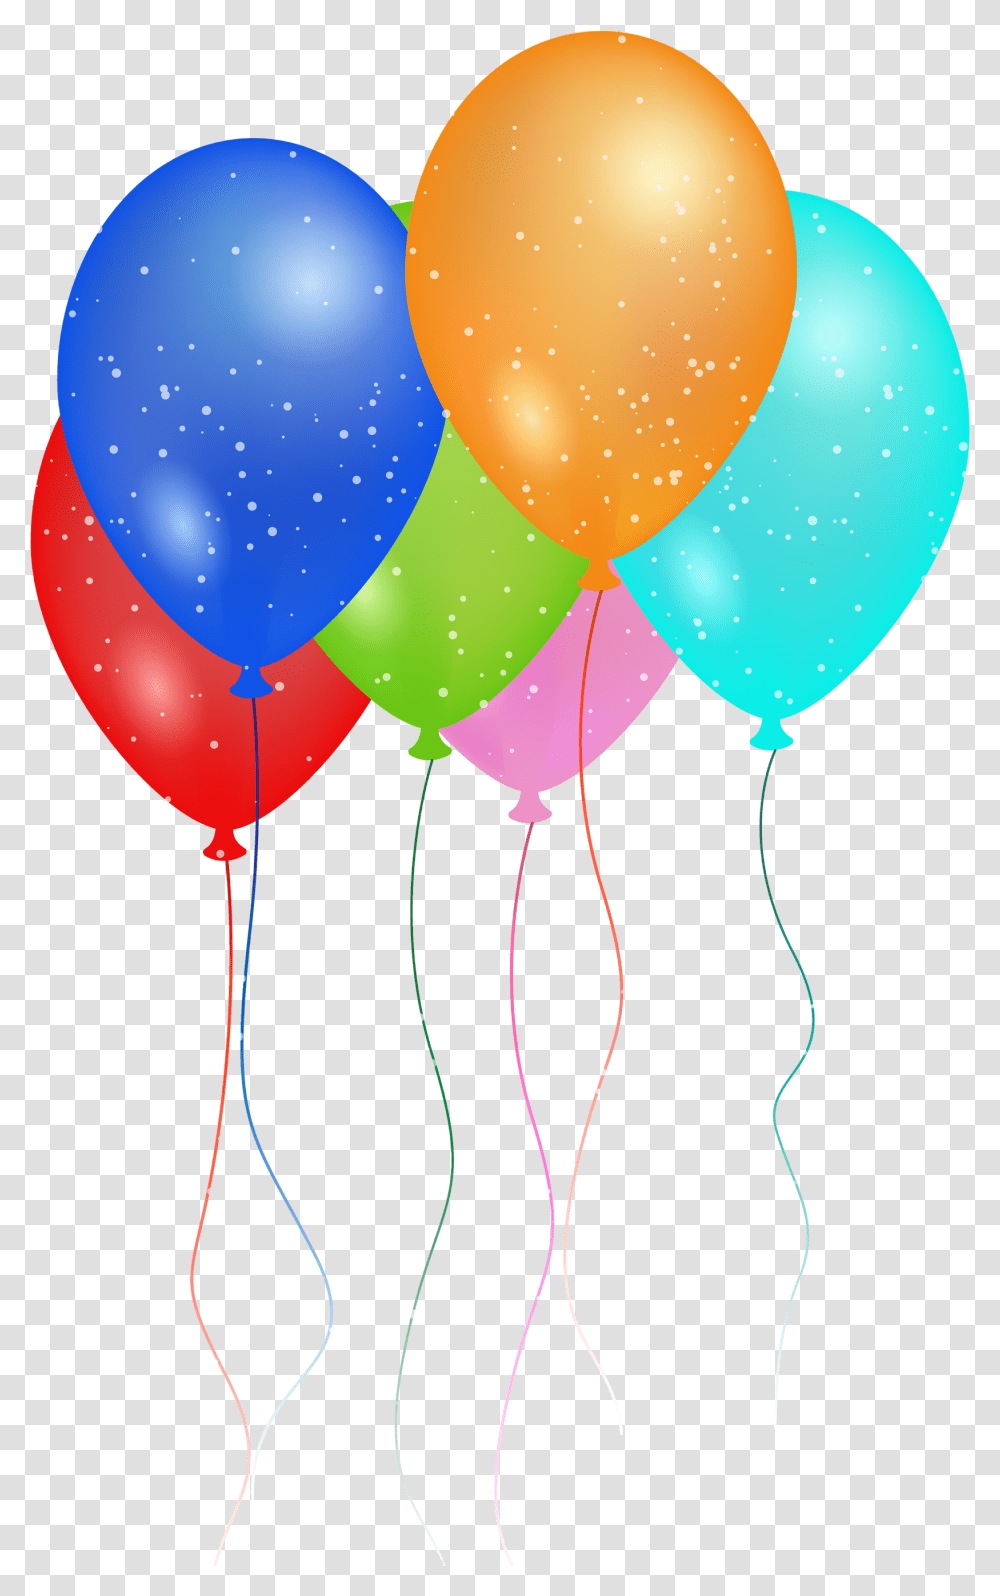 Birthday Party Balloon Image 43927 Free Icons And Happy Birthday Party Balloons Transparent Png